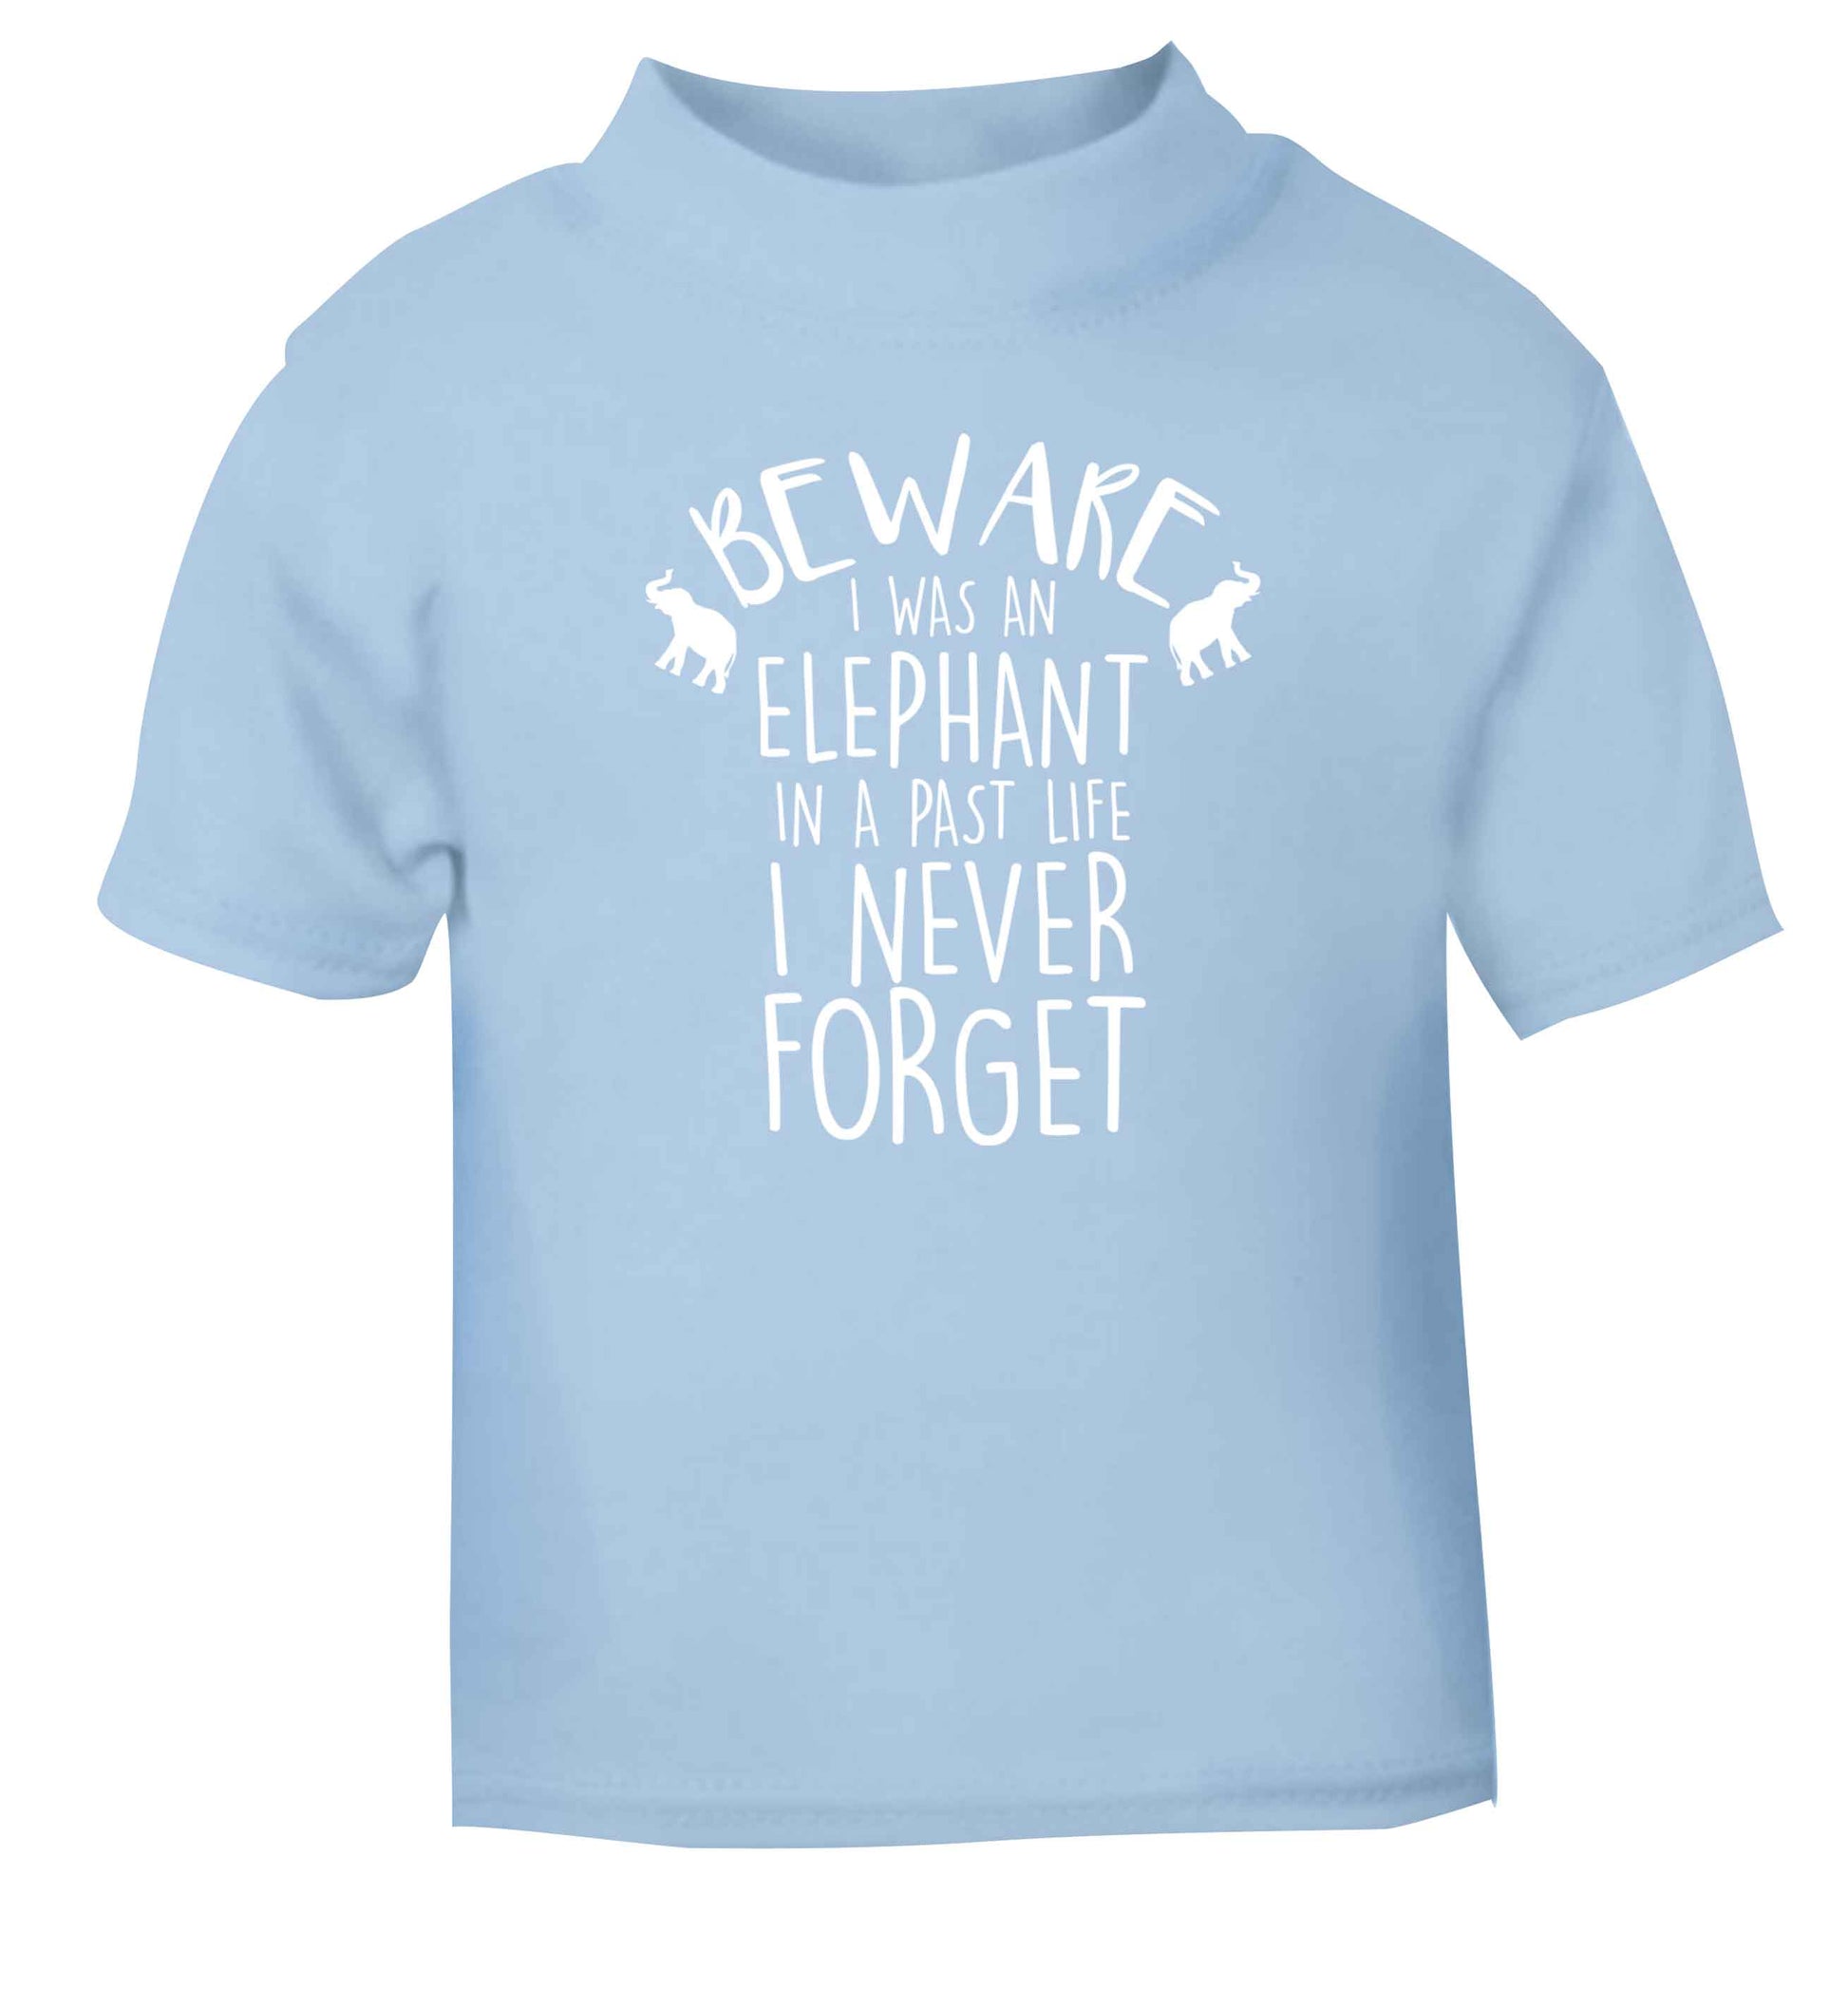 Beware I was an elephant in my past life I never forget light blue Baby Toddler Tshirt 2 Years